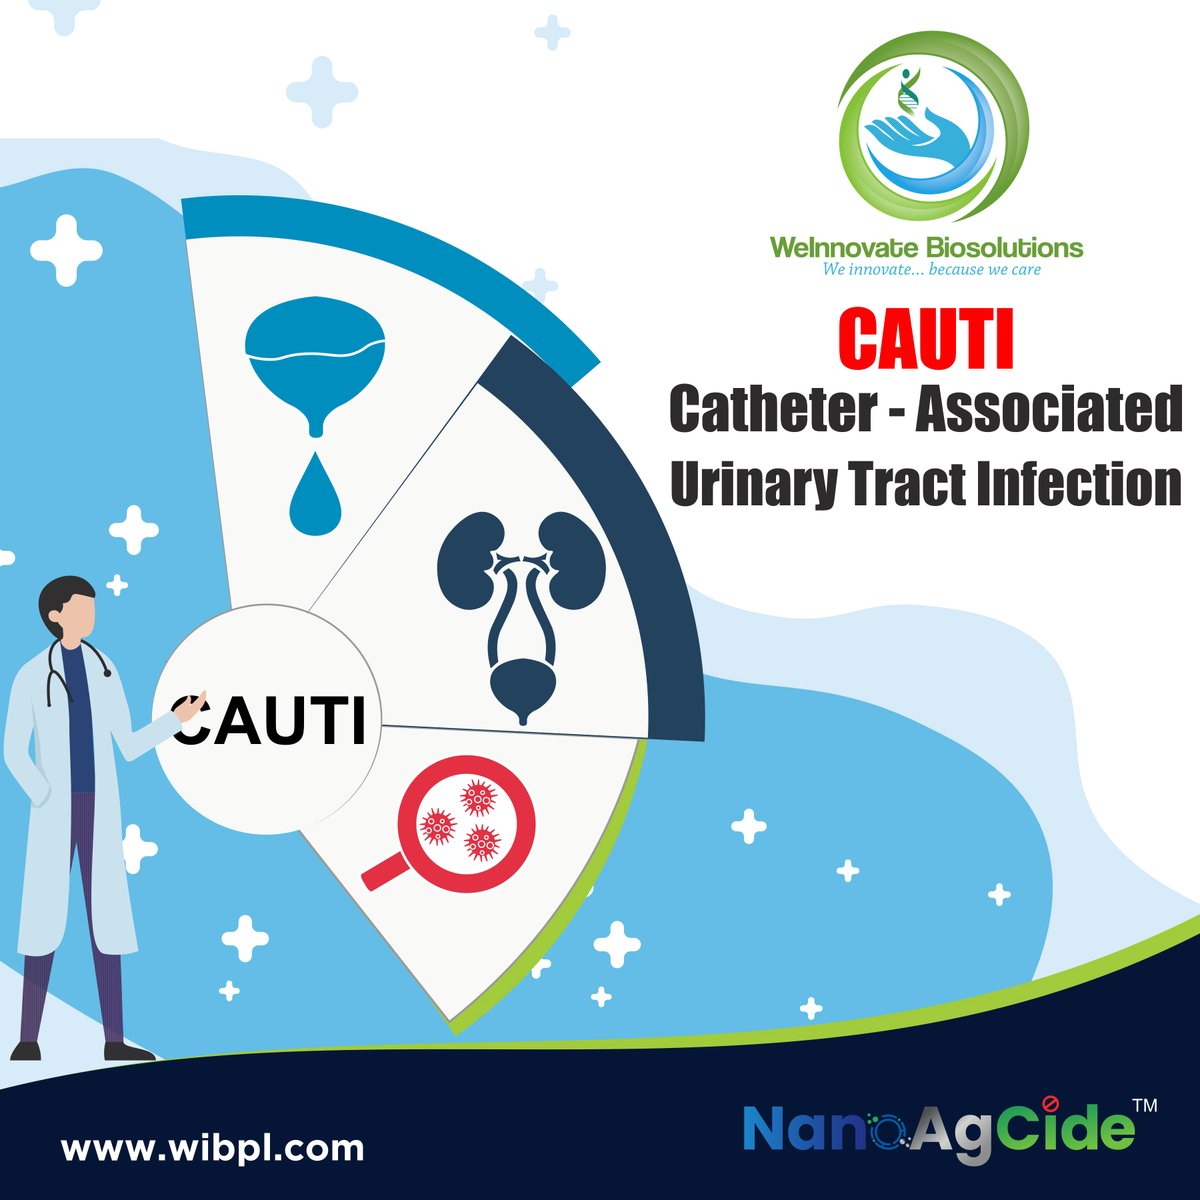 CAUTI is one of the leading causes of Hospital Acquired Infections worldwide

#CAUTI #infectioncontrol #dontdoit #HospitalAcquiredInfections #HAIs #clean #hospital #InfectionPrevention  #InfectionControl  #CleanHandsSaveLives  #patientsafety   #hospitalinfections